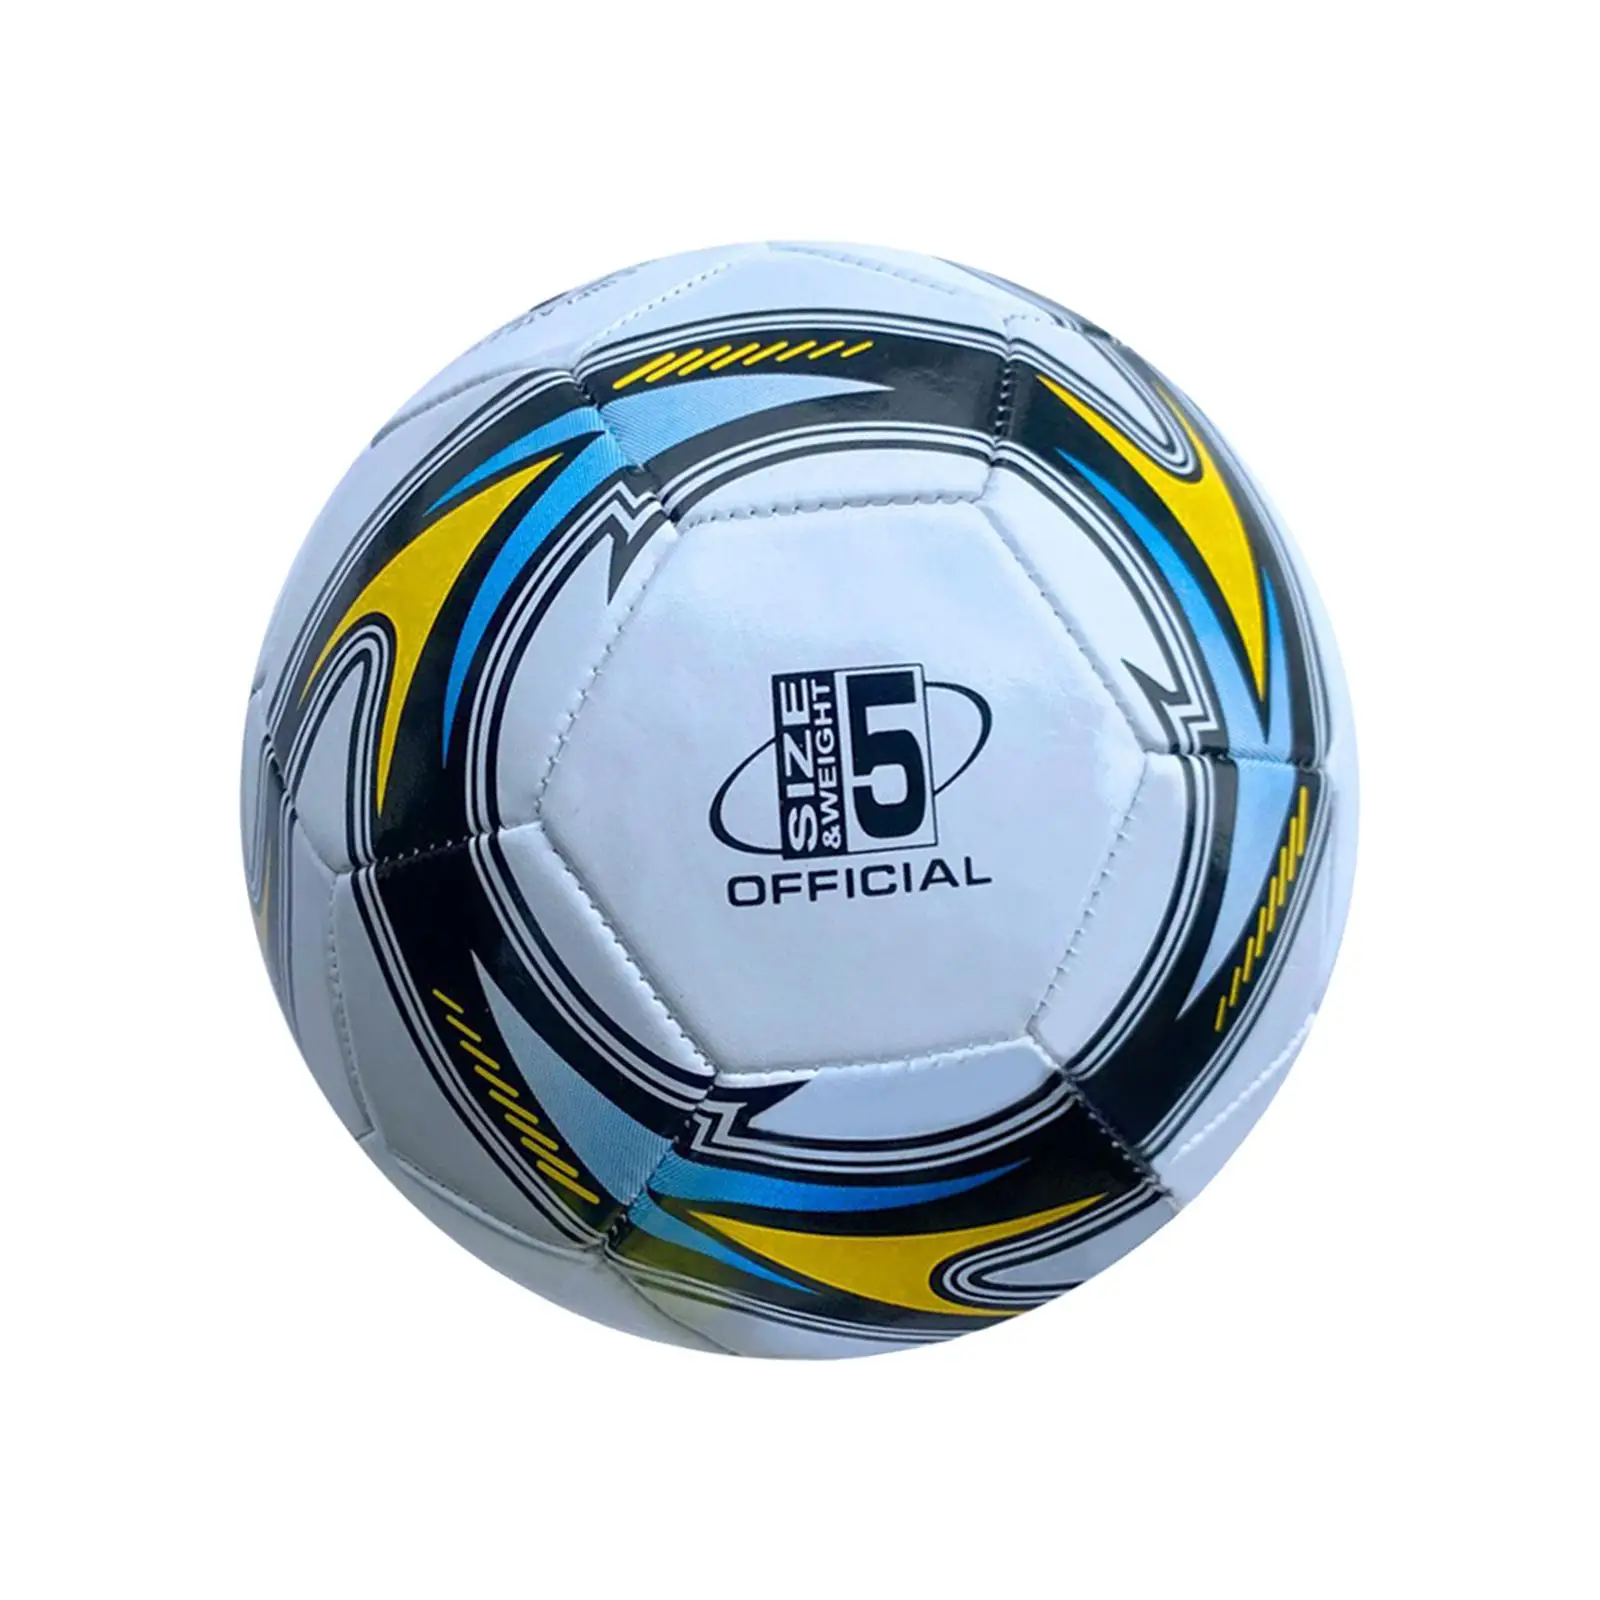 Soccer Ball 21cm Durable Wear Resistant Size 5 for Athletic Beginners Adults